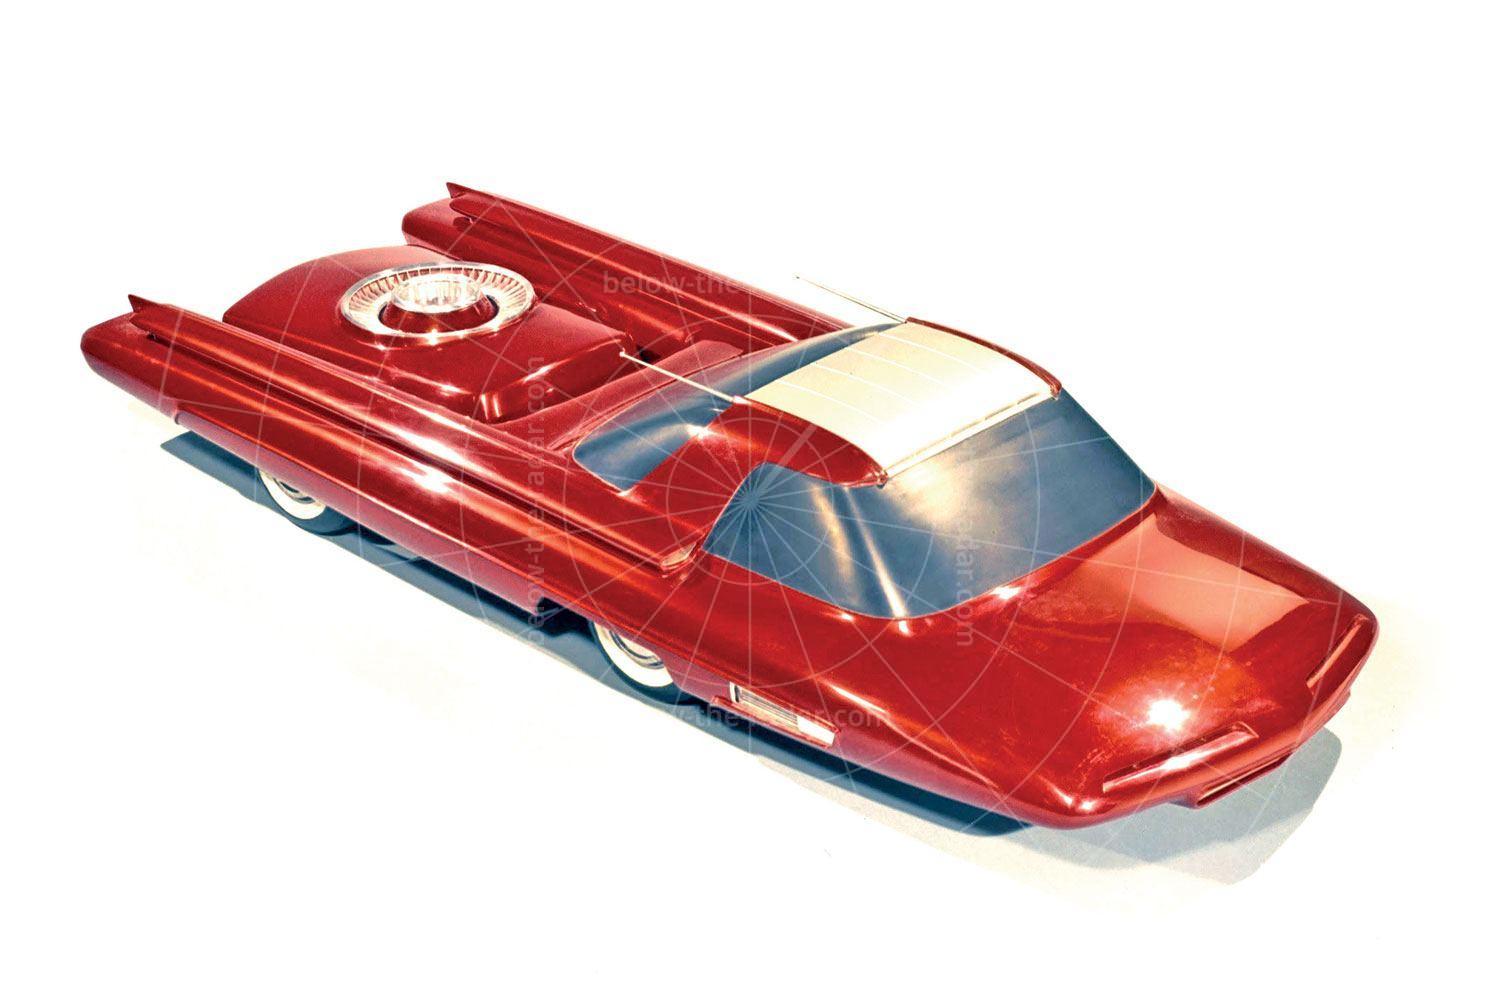 Ford Nucleon concept